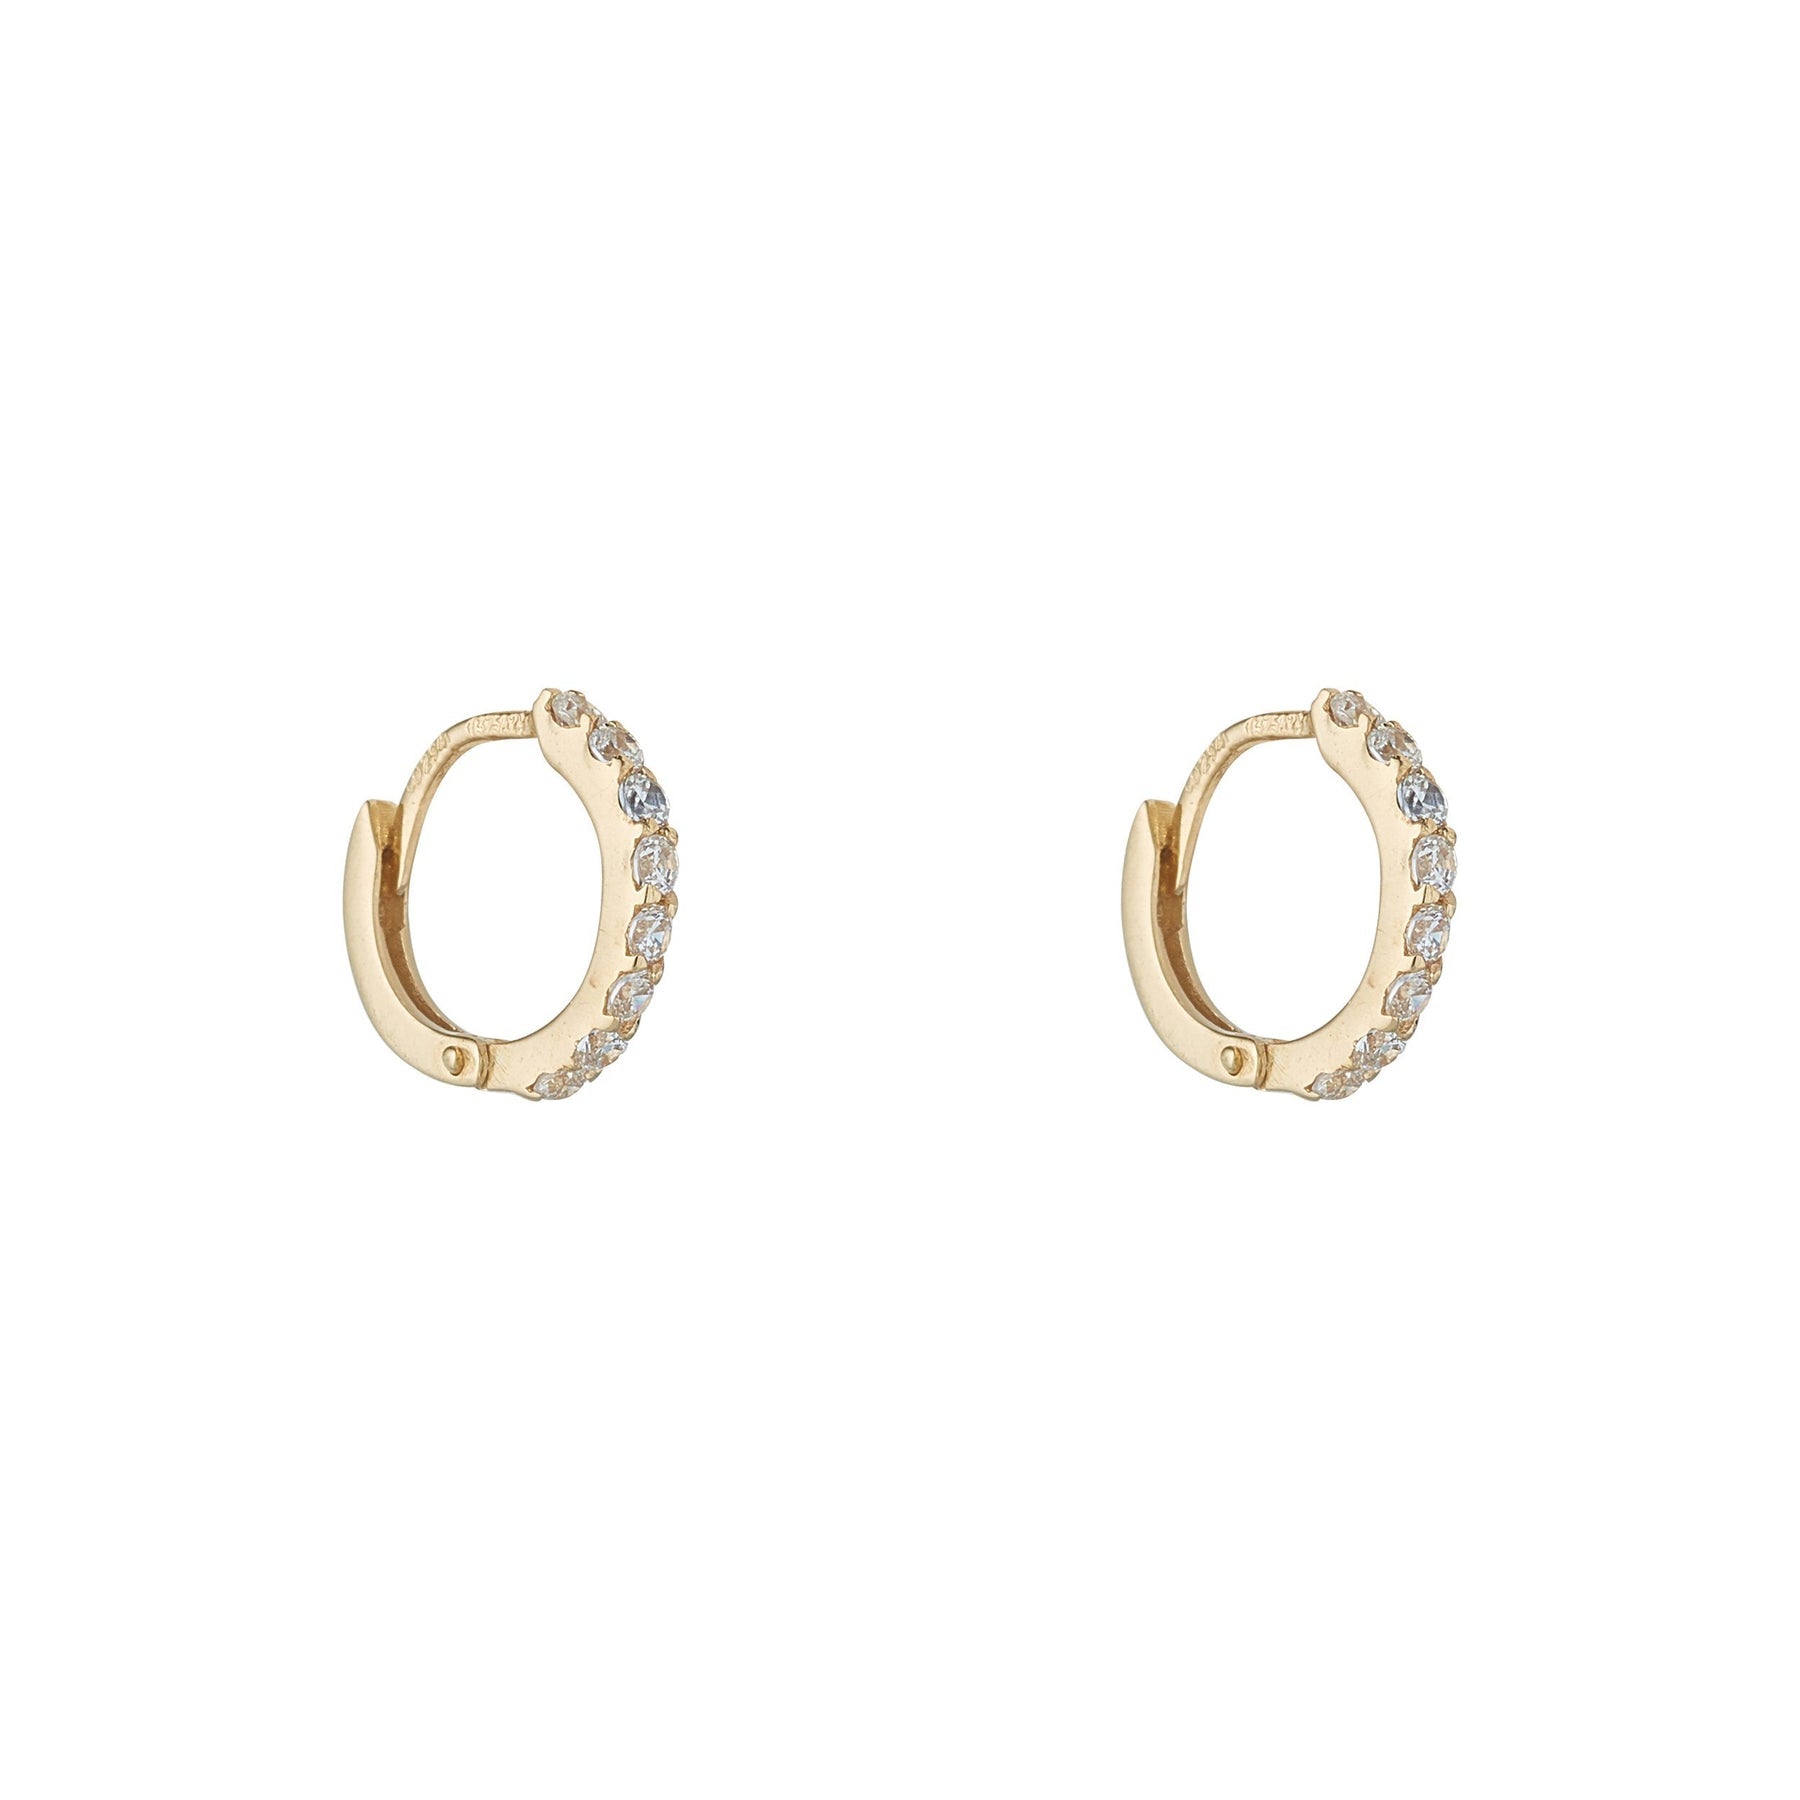 GOLD CUBIC CLAW SET 10MM HUGGIE EARRING - A & M News and Gifts